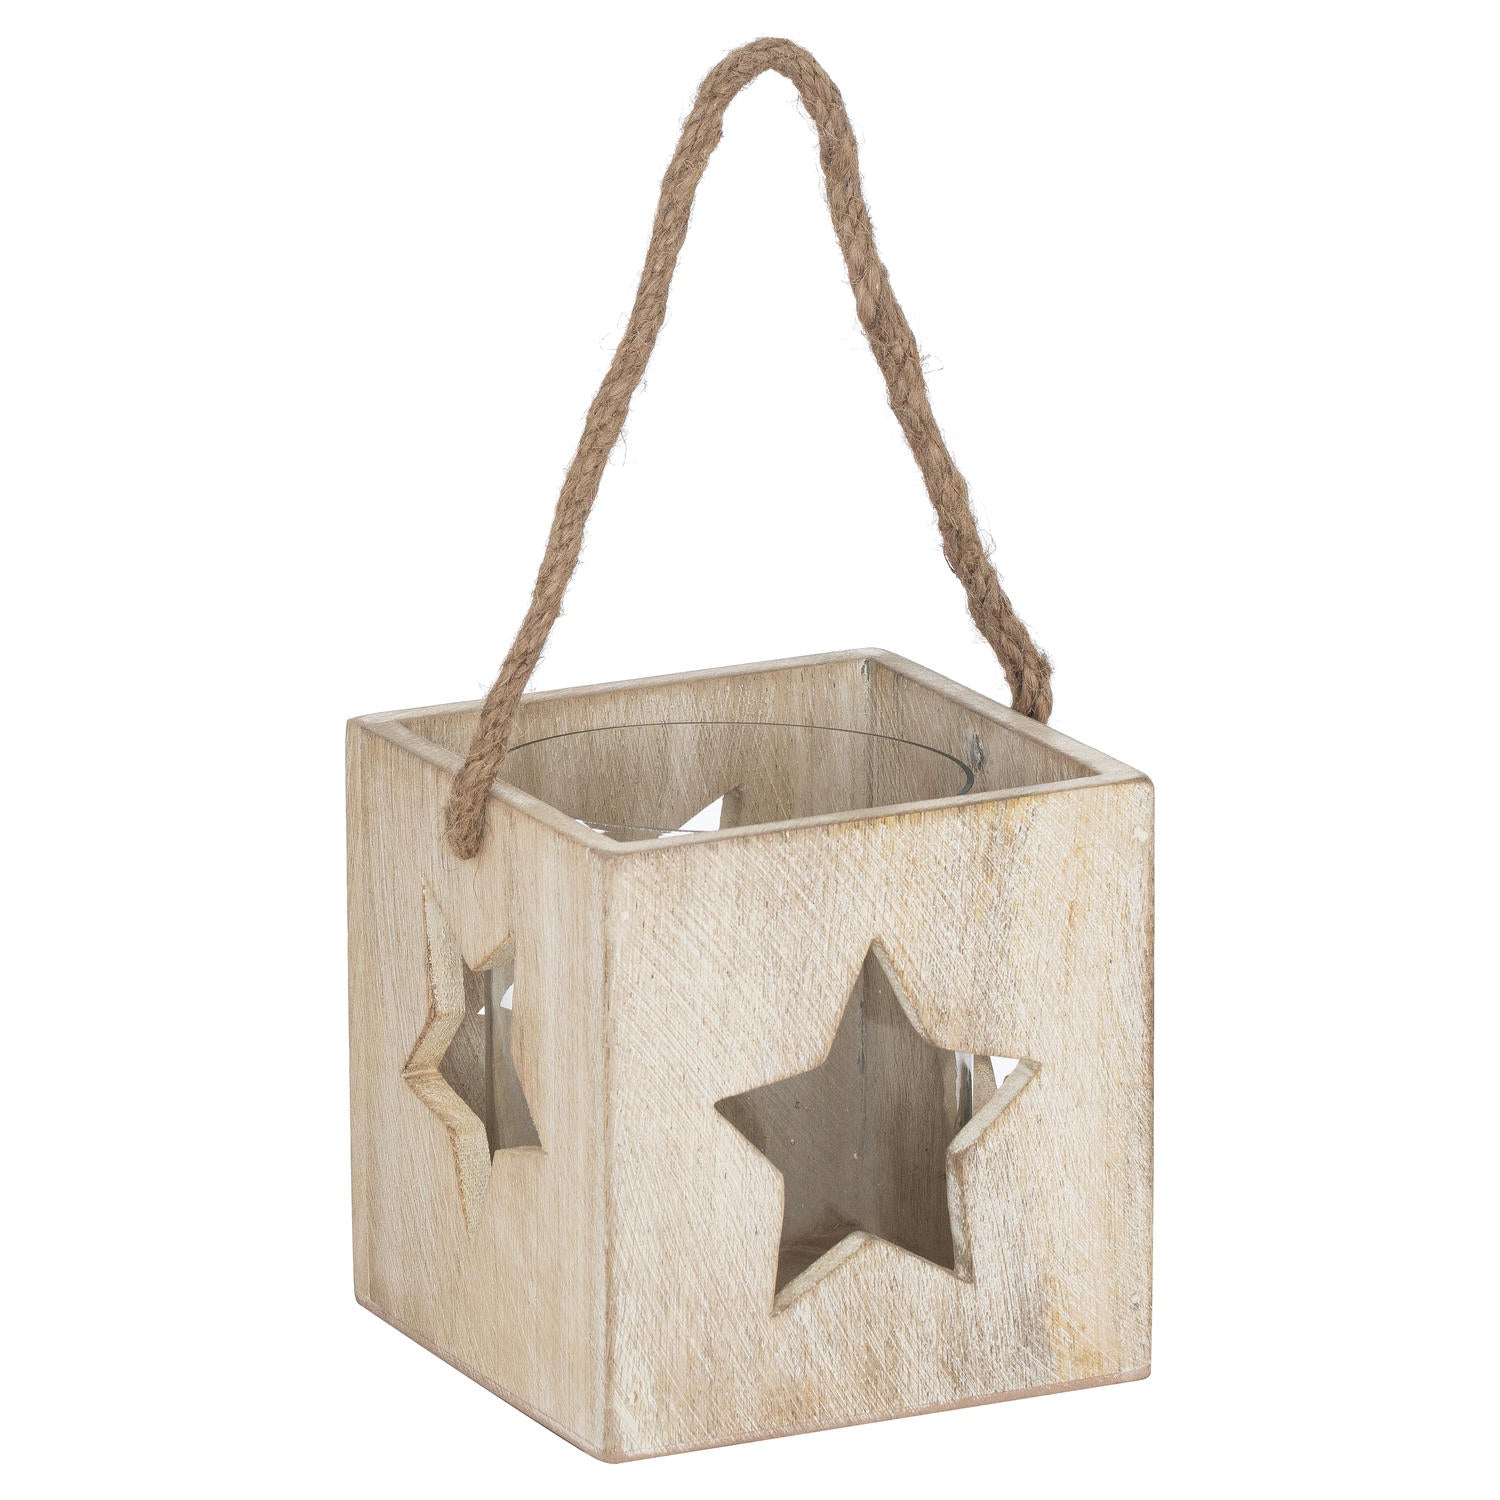 View Washed Wood Large Star Tealight Candle Holder information